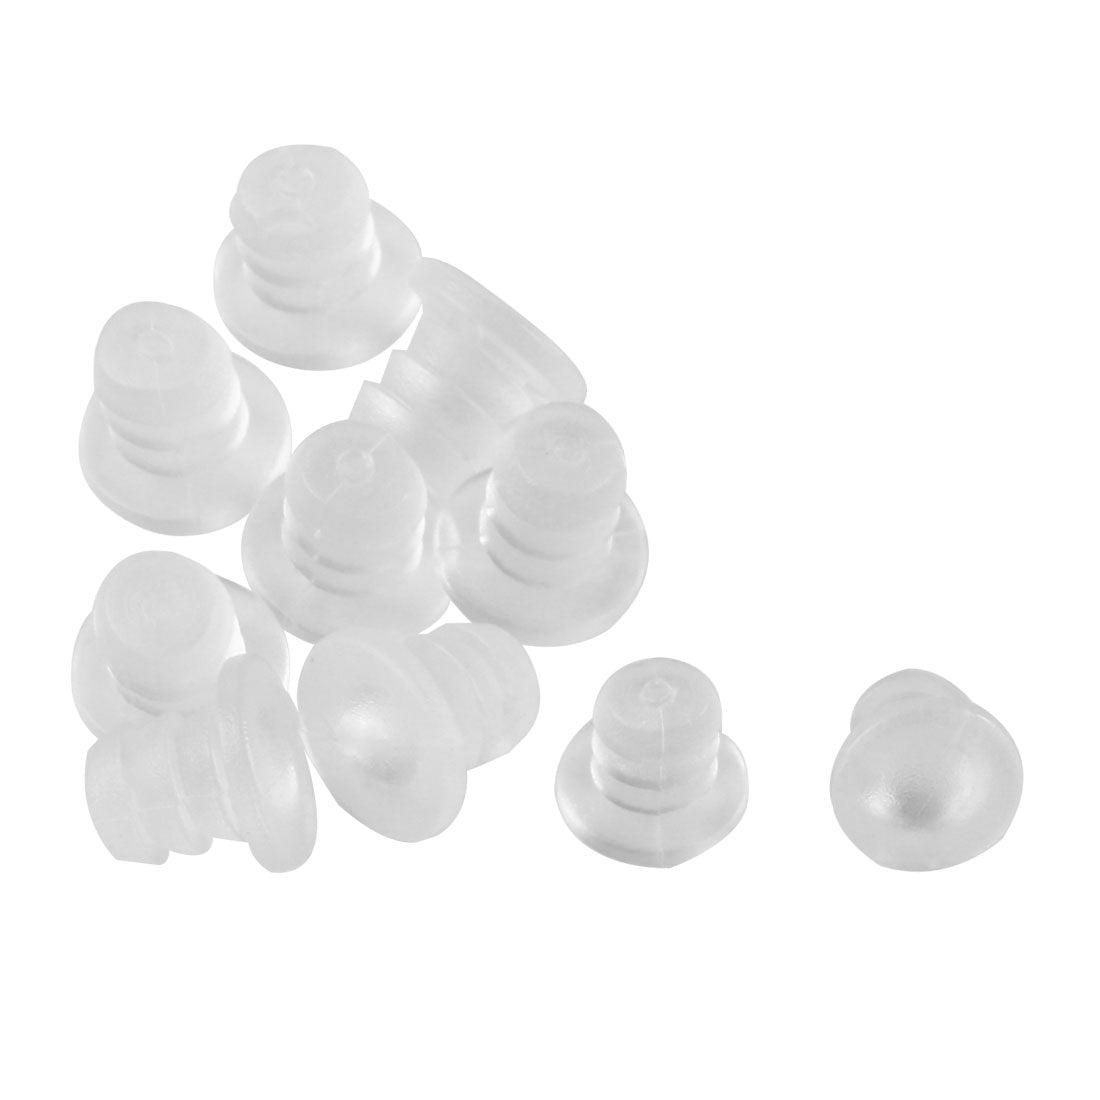 uxcell Uxcell 10pcs 5mm Soft Clear Stem Bumpers Glide, Patio Outdoor Furniture Glass Table Top Anti-collision Embedded